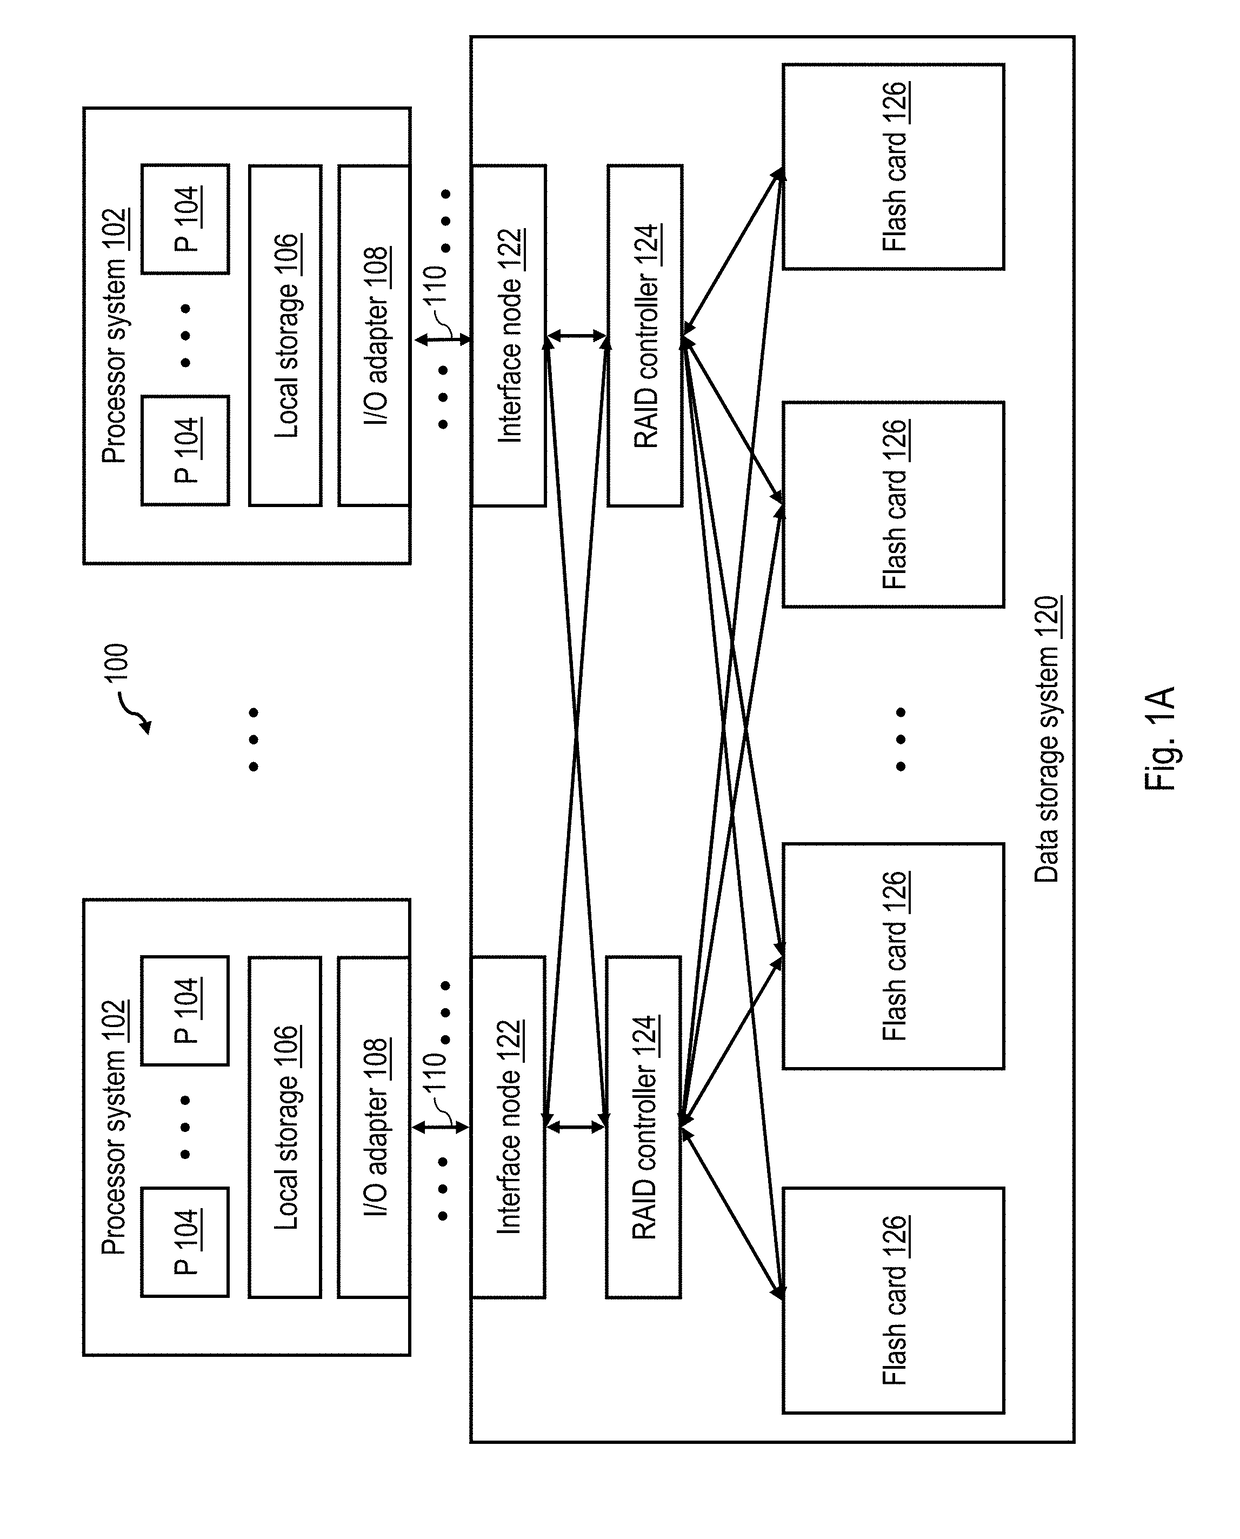 Regrouping data during relocation to facilitate write amplification reduction